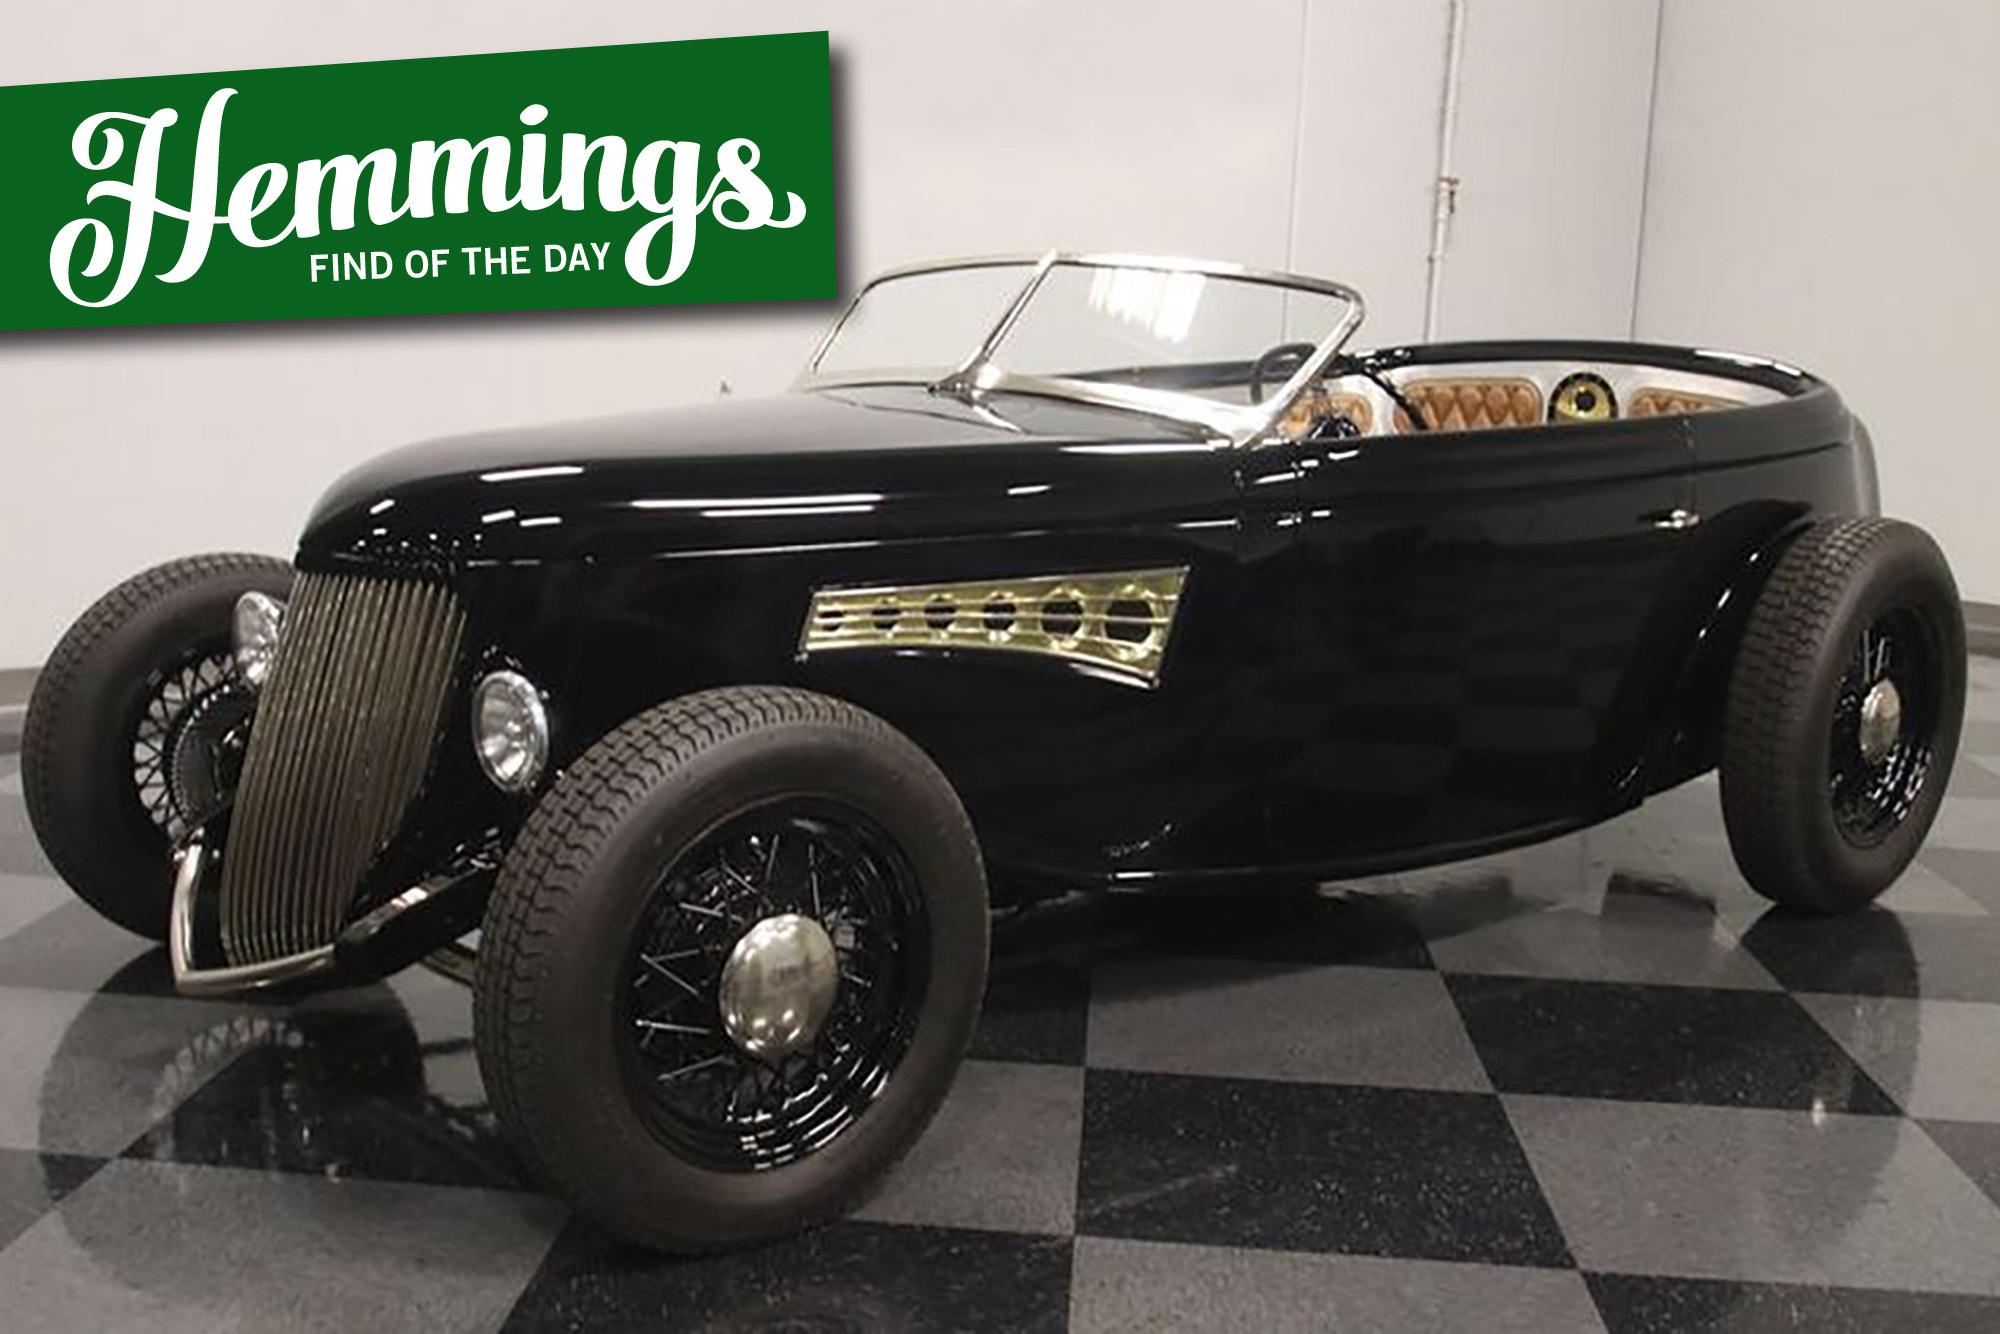 Find of the day: Is This 1936 Ford Speedster Another Hot Rod or a Coachbuilt Gem?